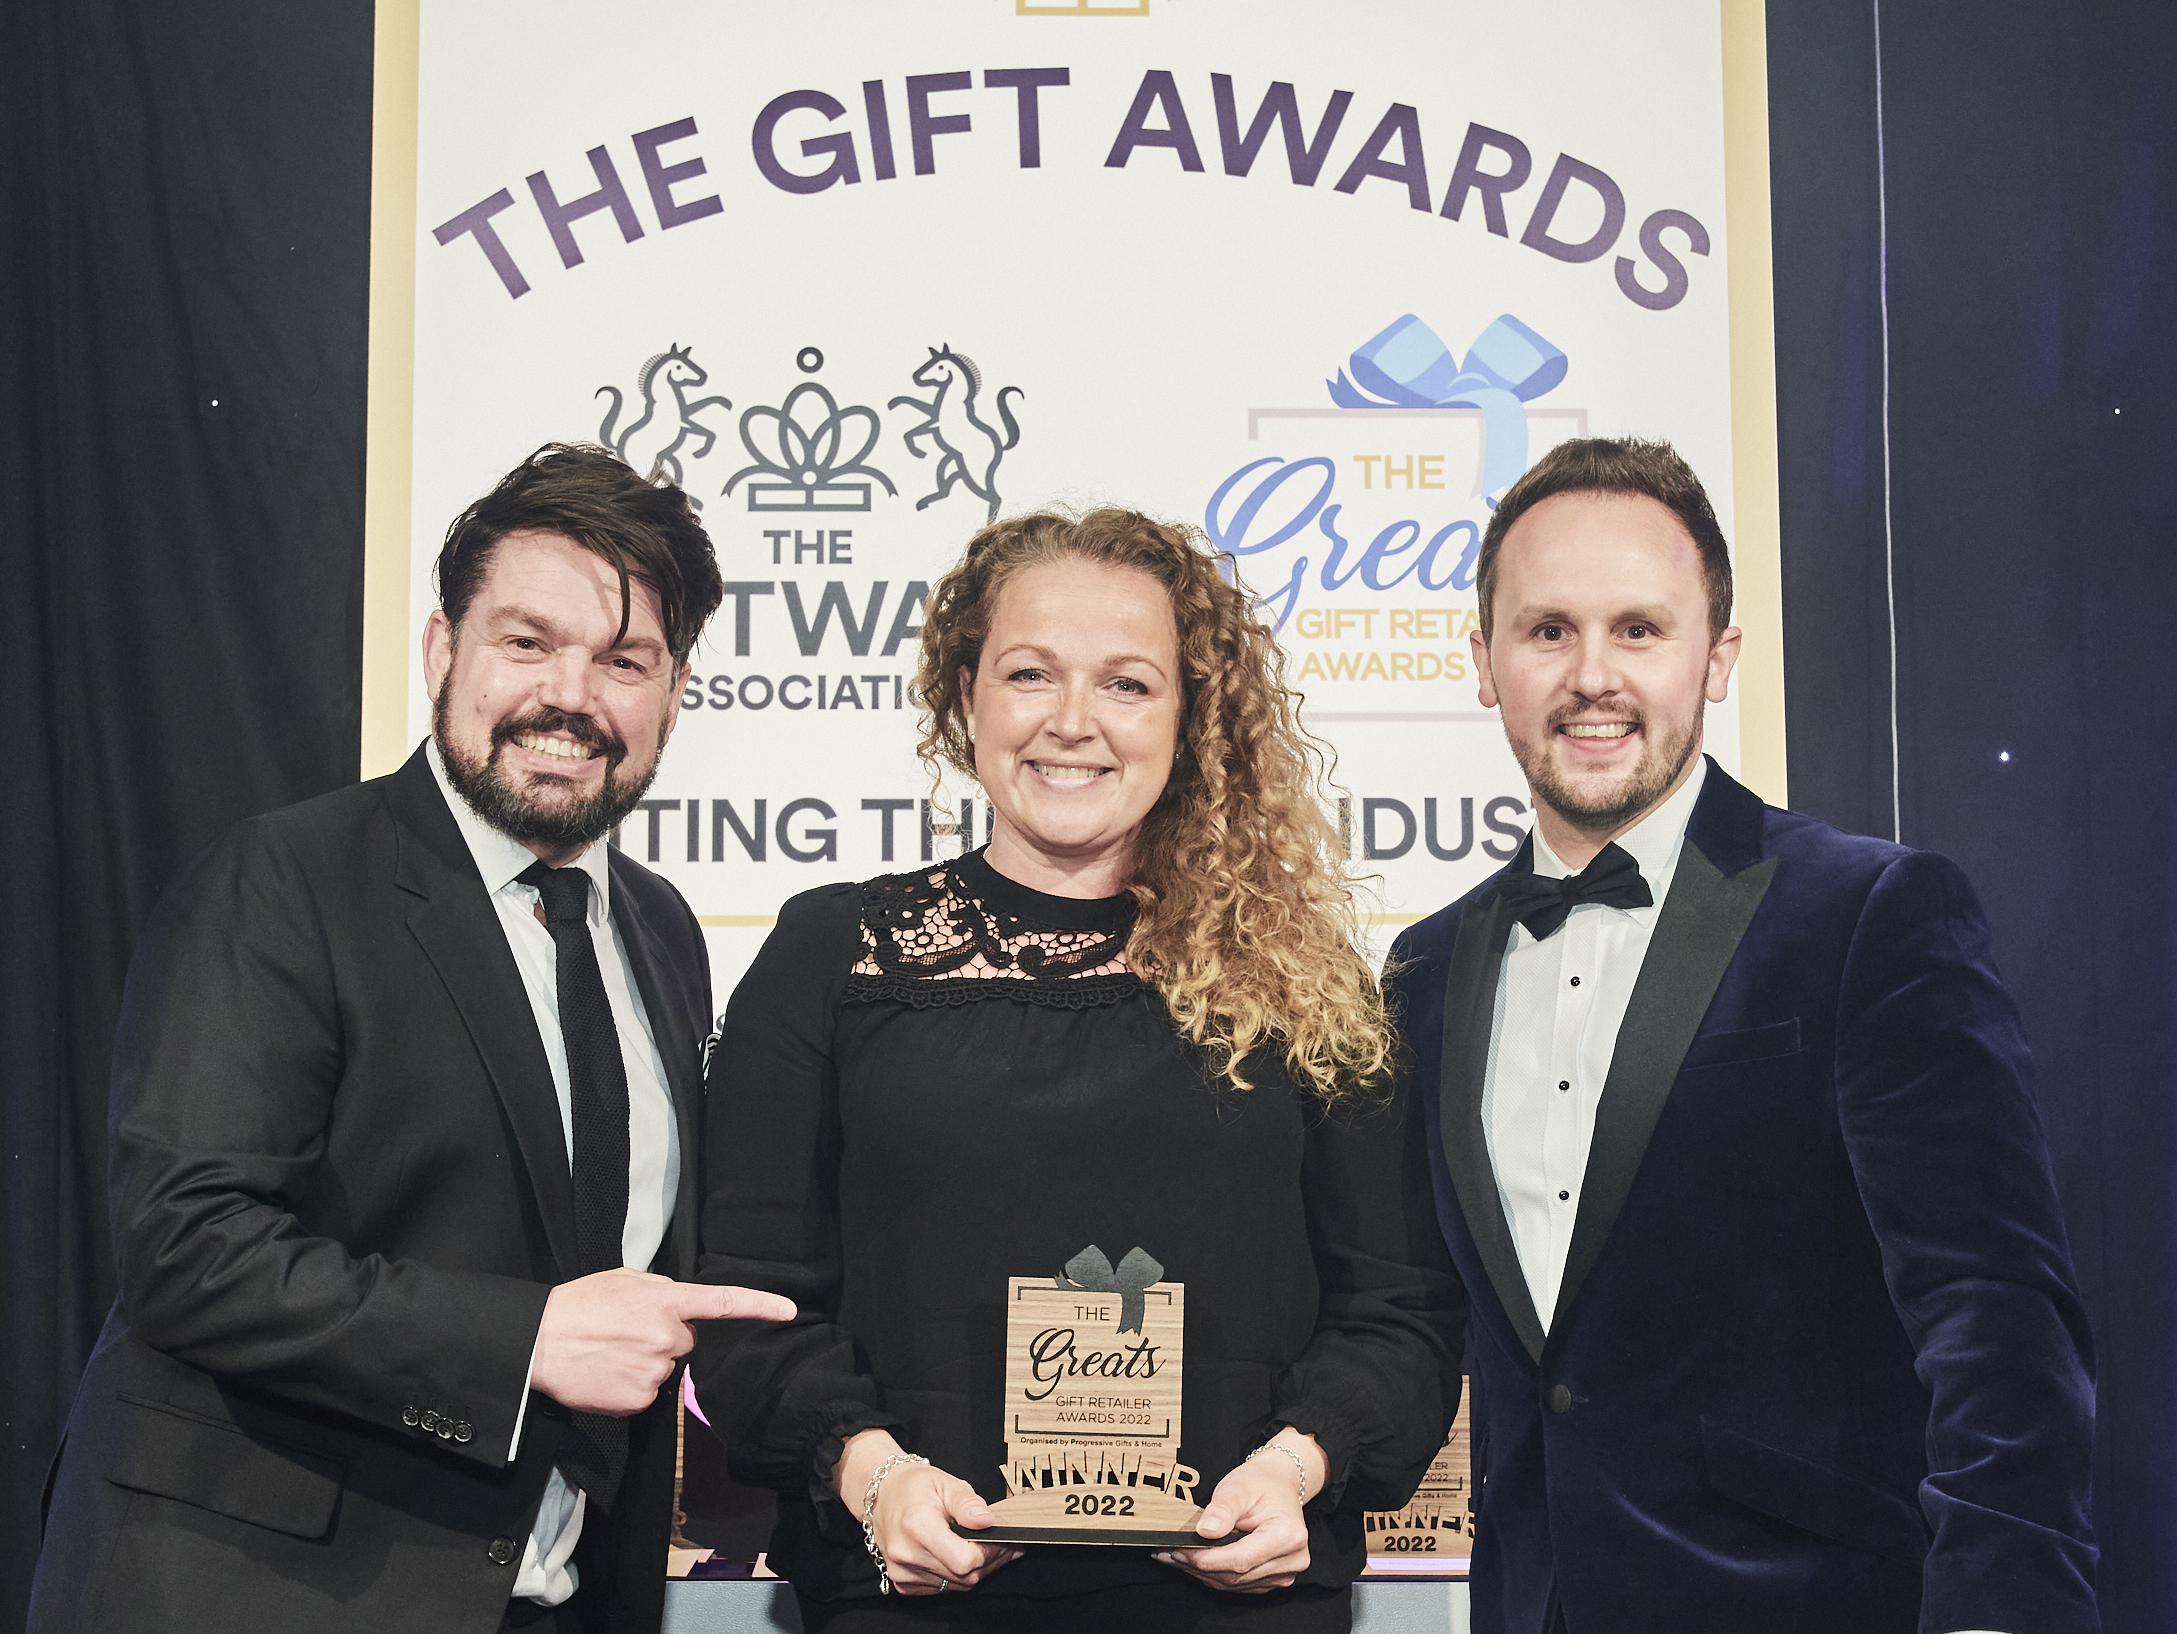 Above: Dan Illingworth (right), head of independent and export sales at category sponsor Widdop And Co, presented the winning Greats trophy to Nest owner Samantha Gibbs